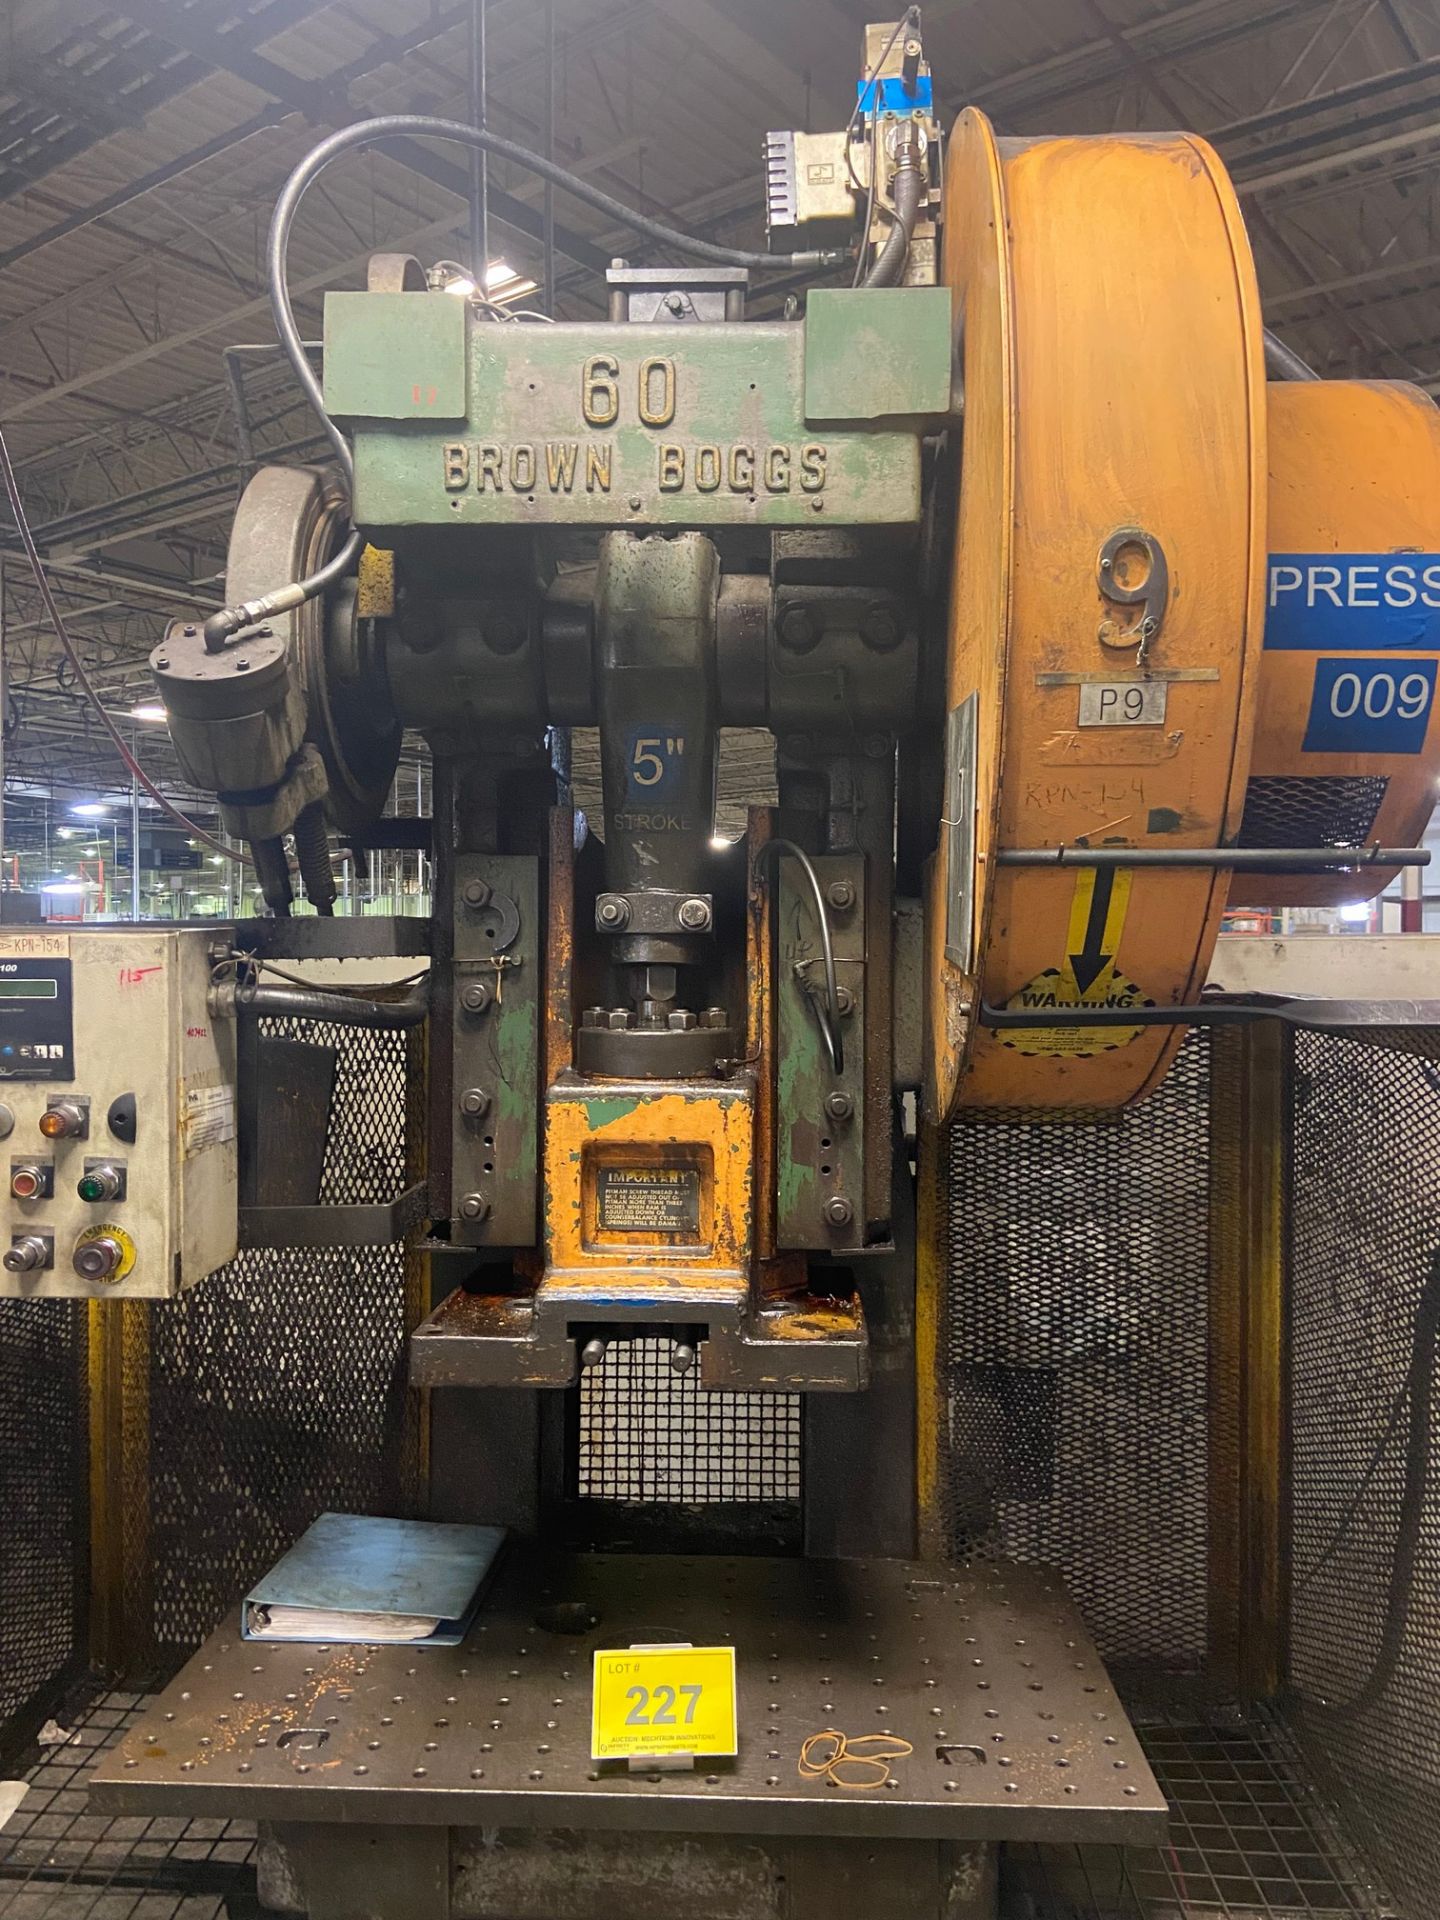 BROWN BOGGS 60 TON OBI PUNCH PRESS, 5 HP, 3/60/60 VOLTS, 5" STROKE, CIECO PCI-100 CONTROLLER, S/N: - Image 2 of 13